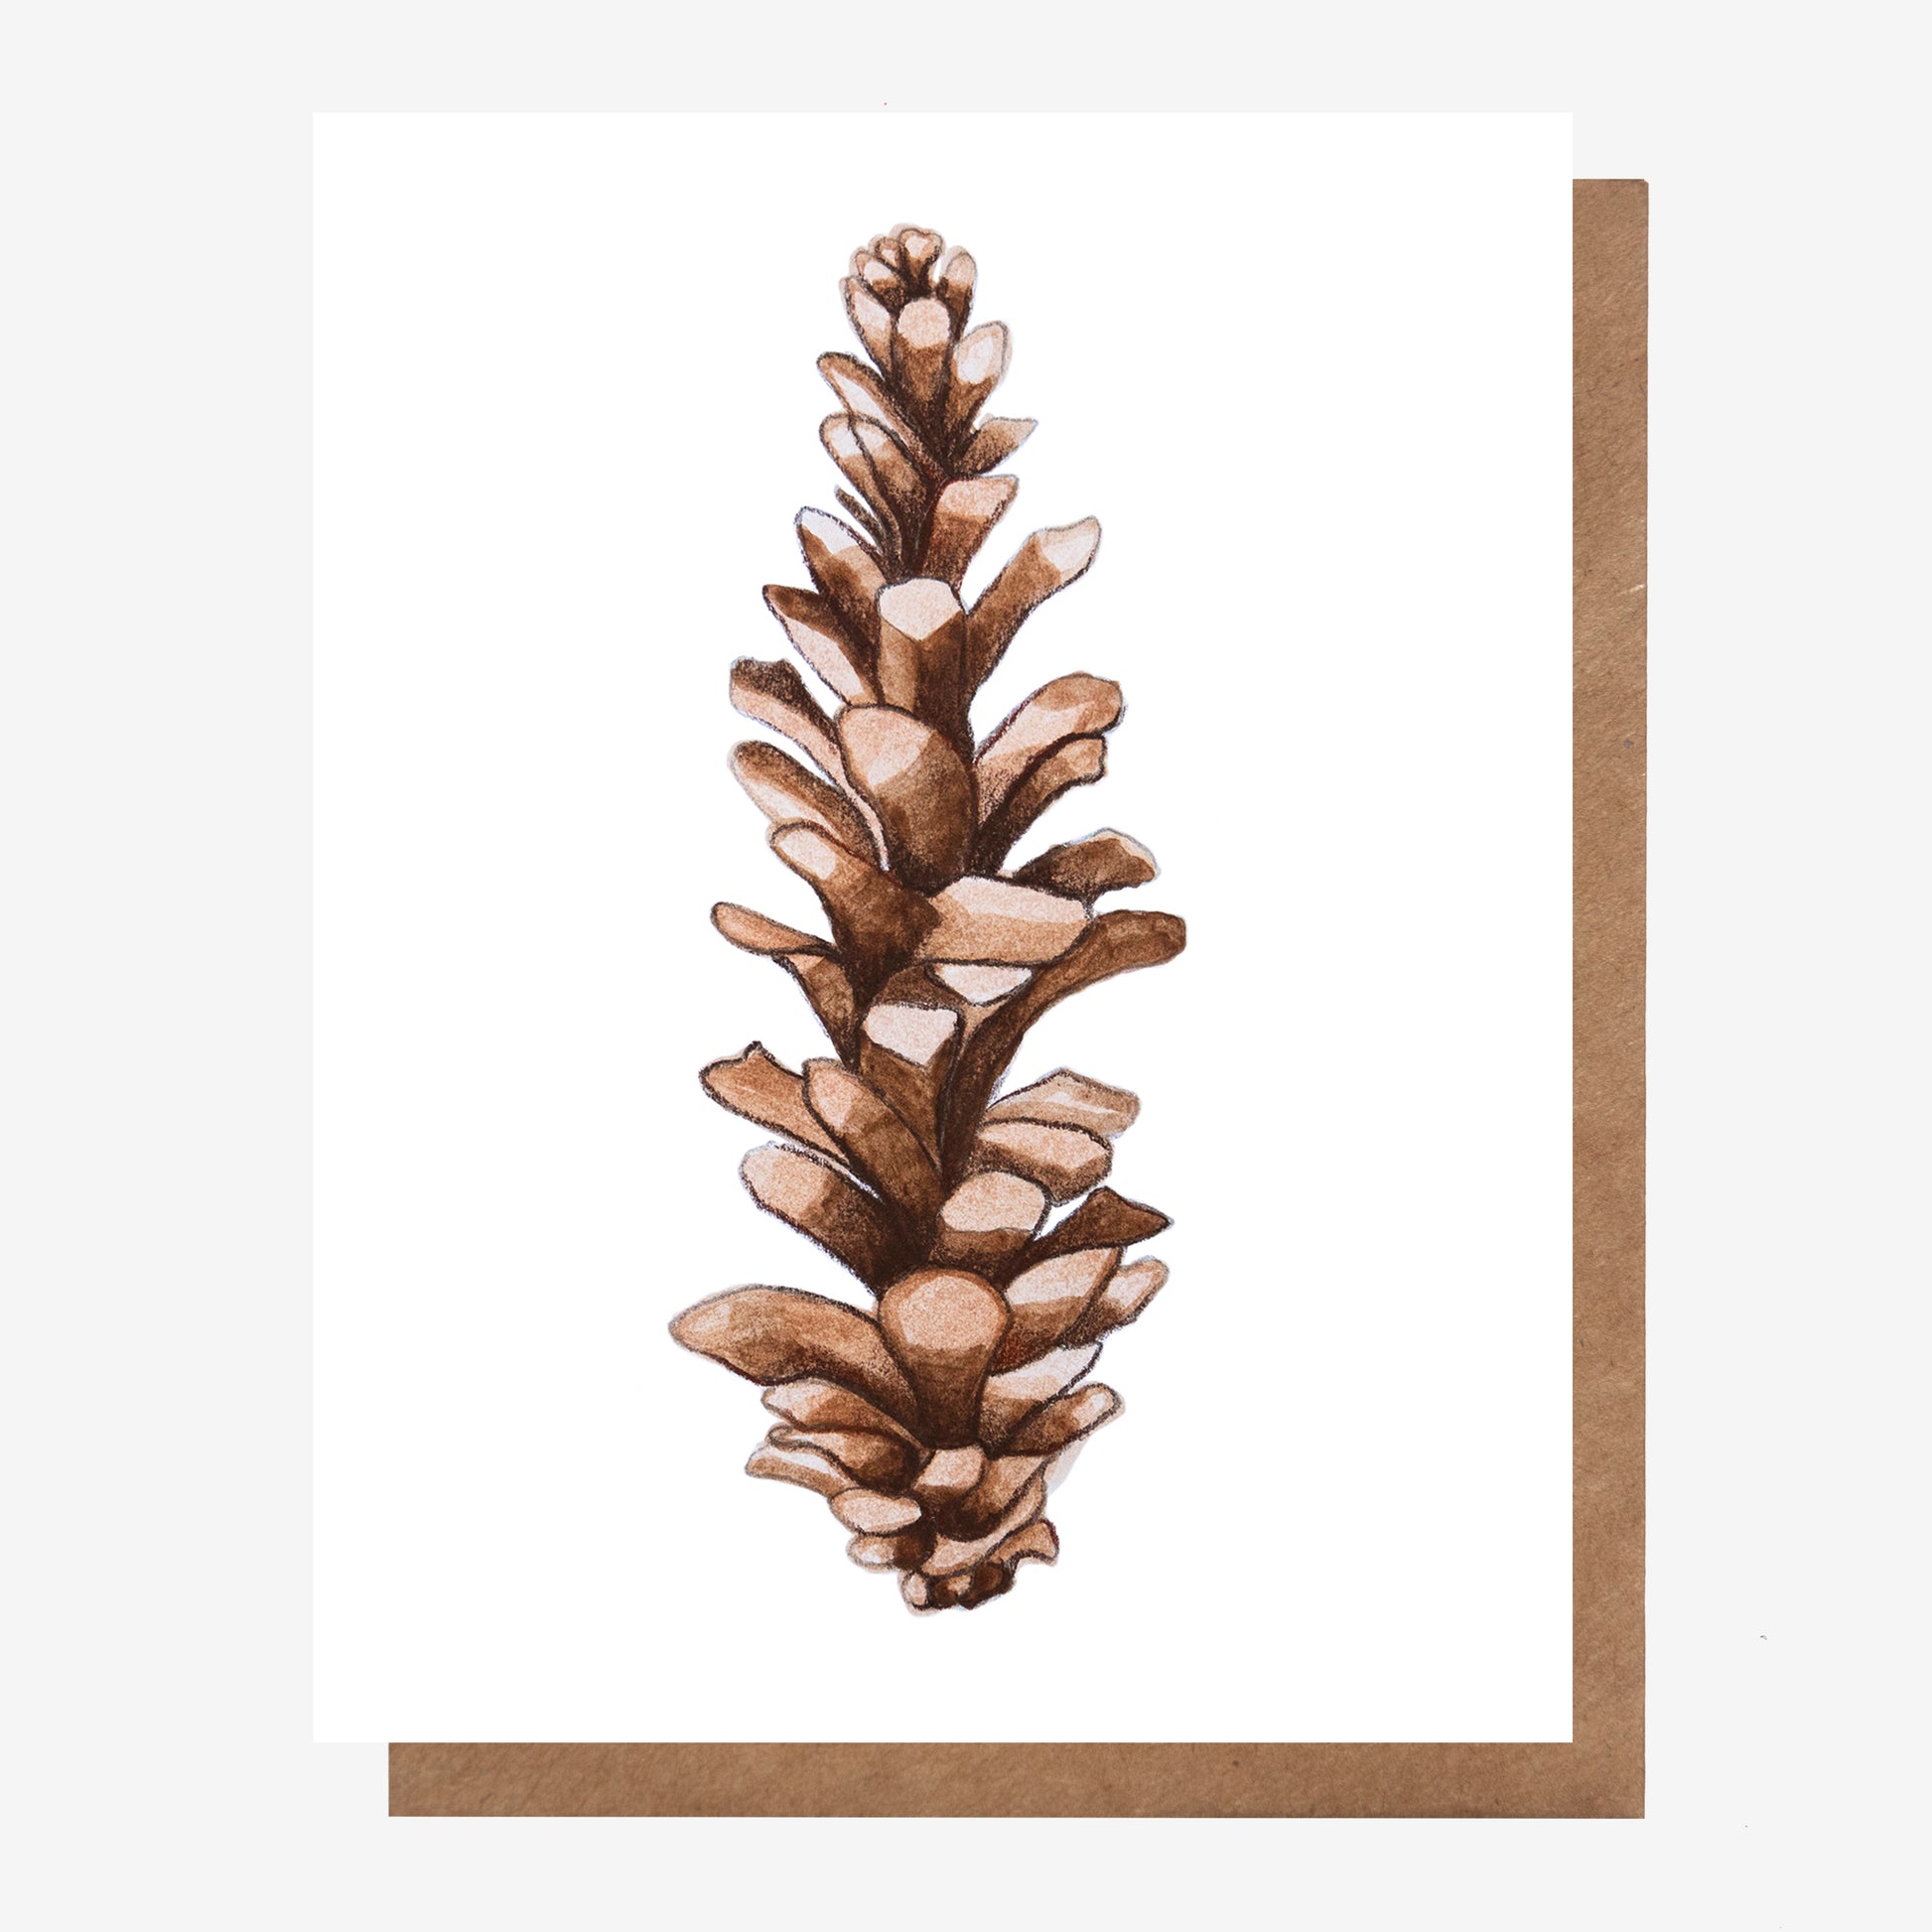 Hand-drawn Pinecone greeting card for all occasions, made in Nova Scotia Canada by Coastal Card Co.